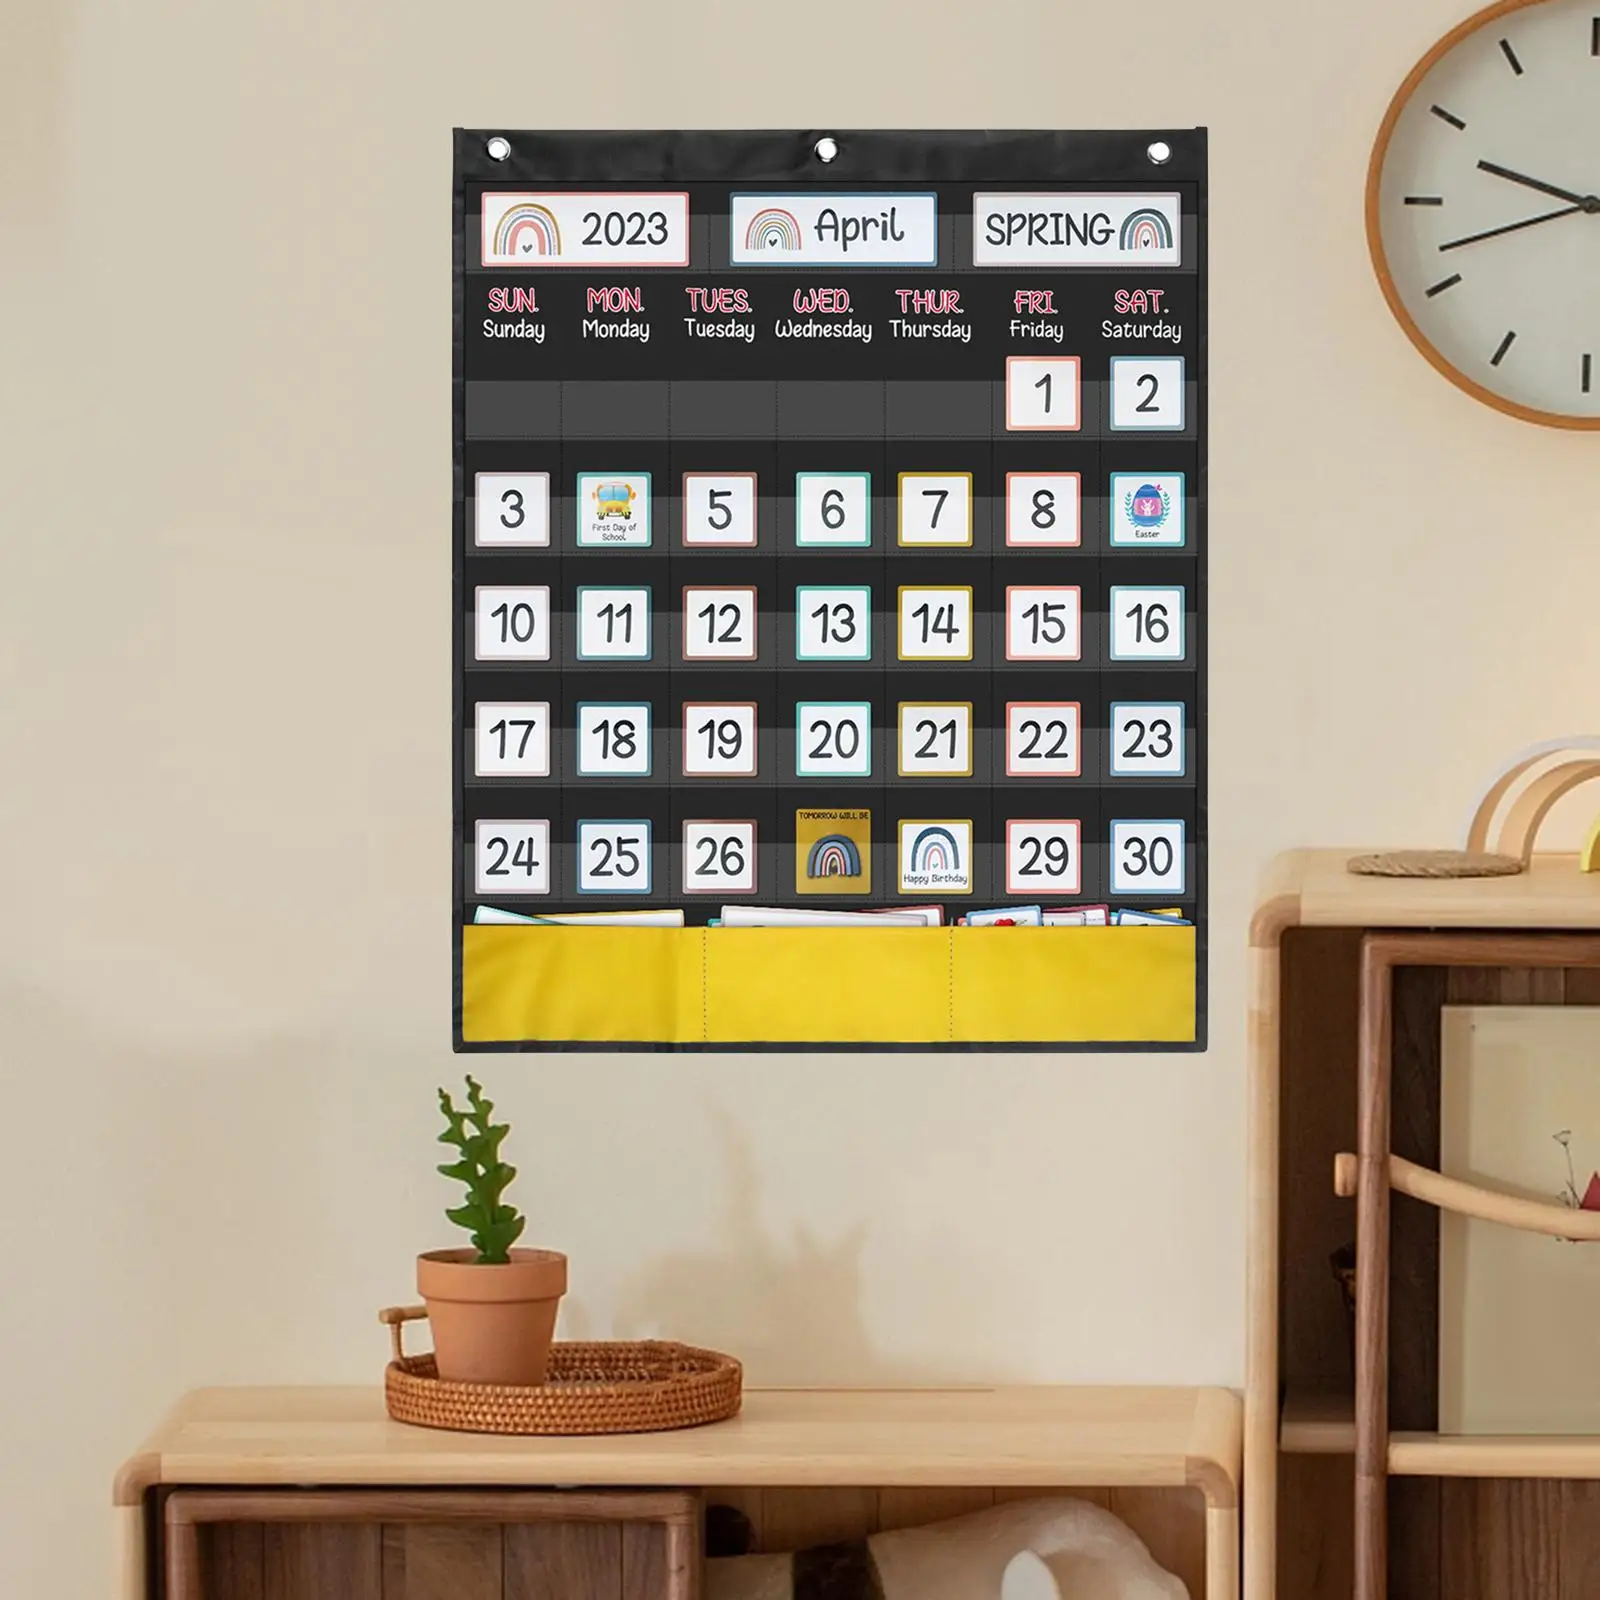 Calendar Pocket Chart Homeschooling with 89 Cards Helping Young Students Weekly Calendar Essential Classroom Organized Chart